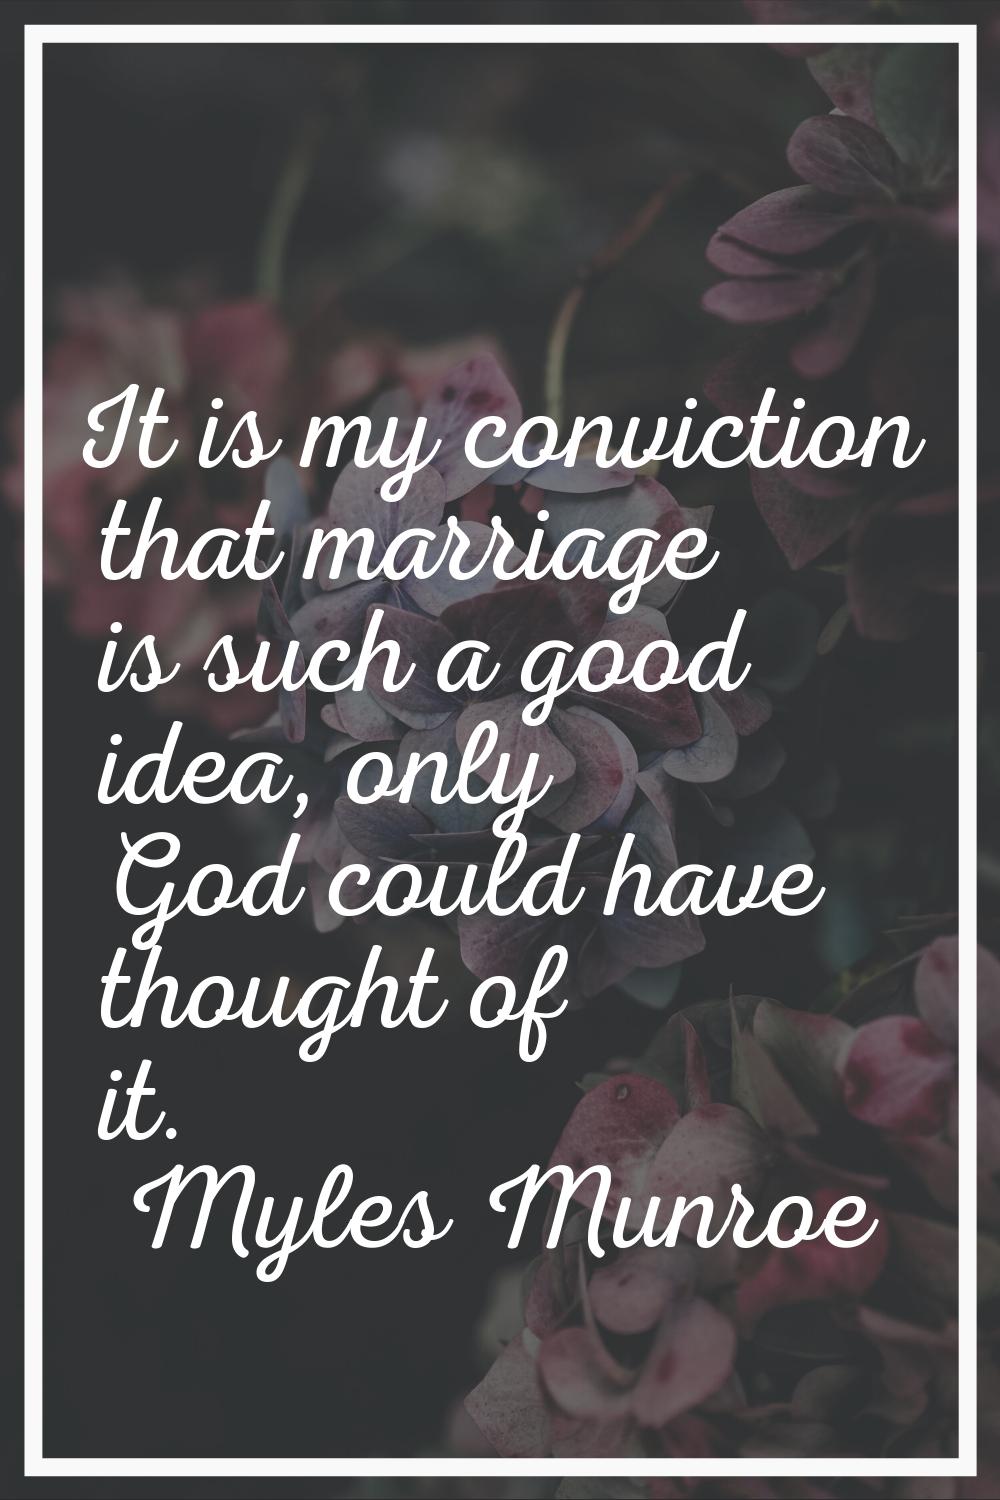 It is my conviction that marriage is such a good idea, only God could have thought of it.